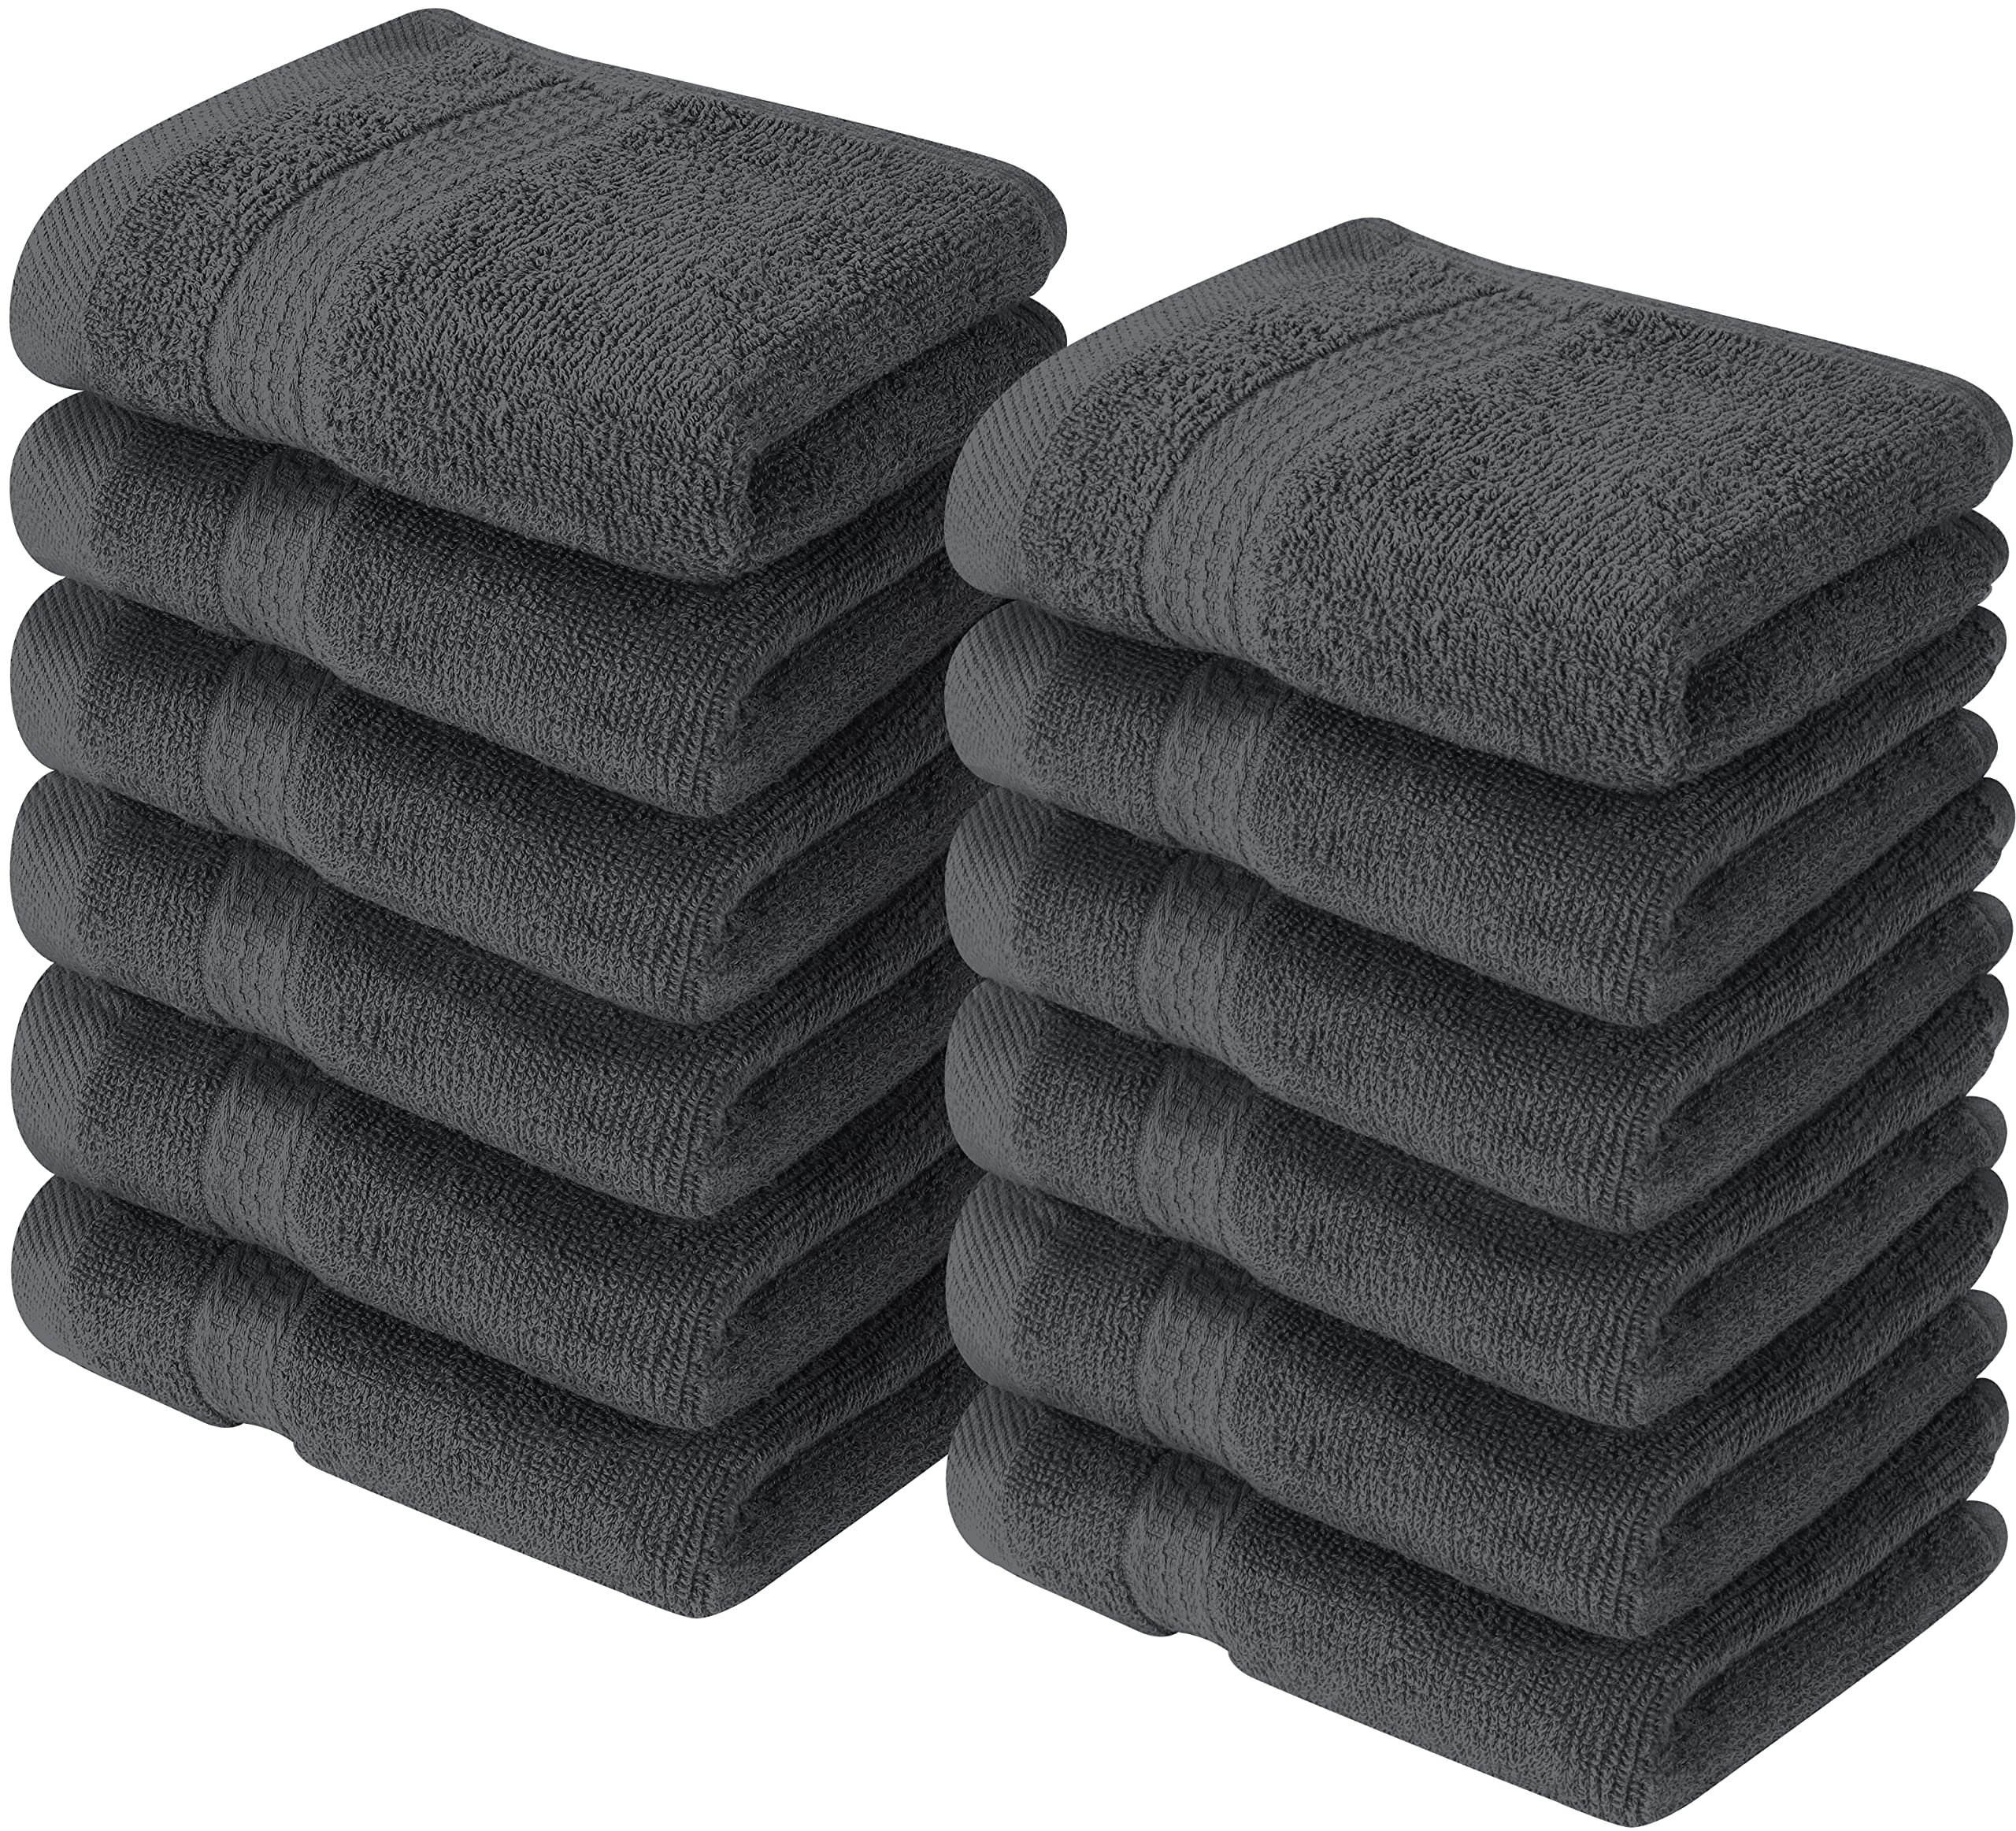 Utopia Towels 12 Pack Premium Wash Cloths Set (12 x 12 Inches) 100% Cotton  Ring Spun, Highly Absorbent and Soft Feel Essential Washcloths for Bathroom,  Spa, Gym, and Face Towel (Grey) 12 Pack Grey